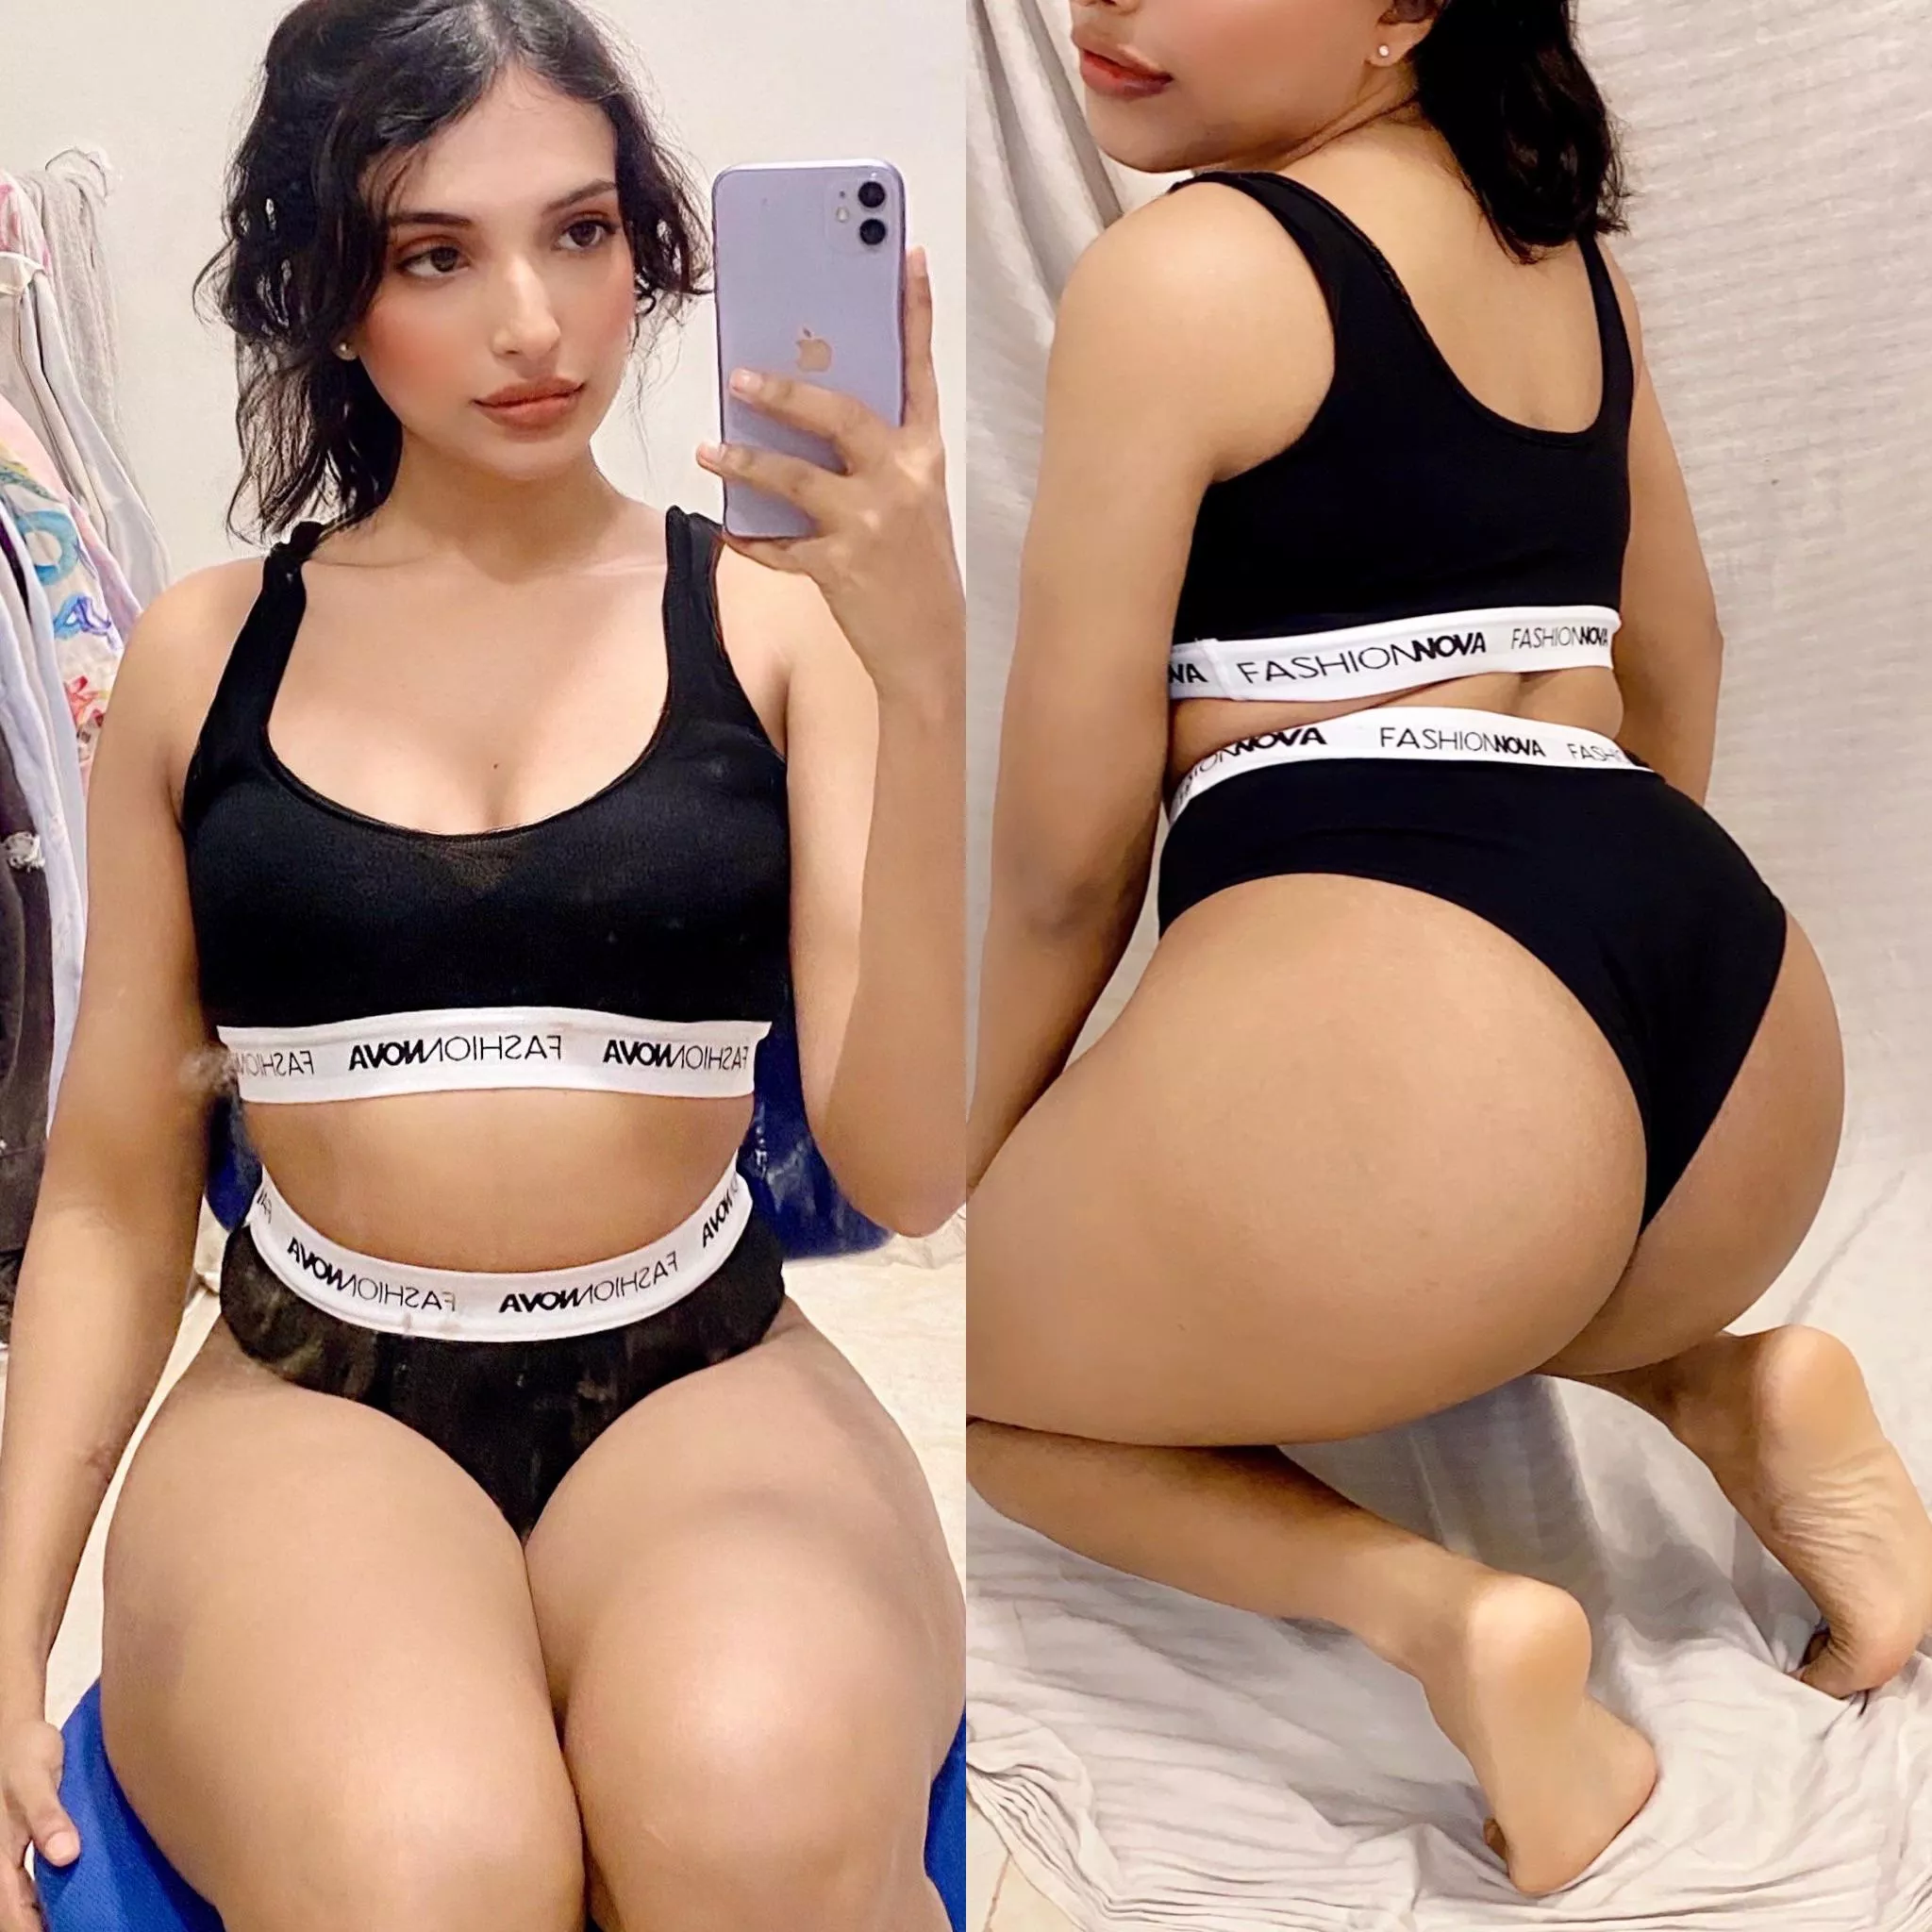 can I be your trans girlfriend nudes Shemales NUDE-PICS